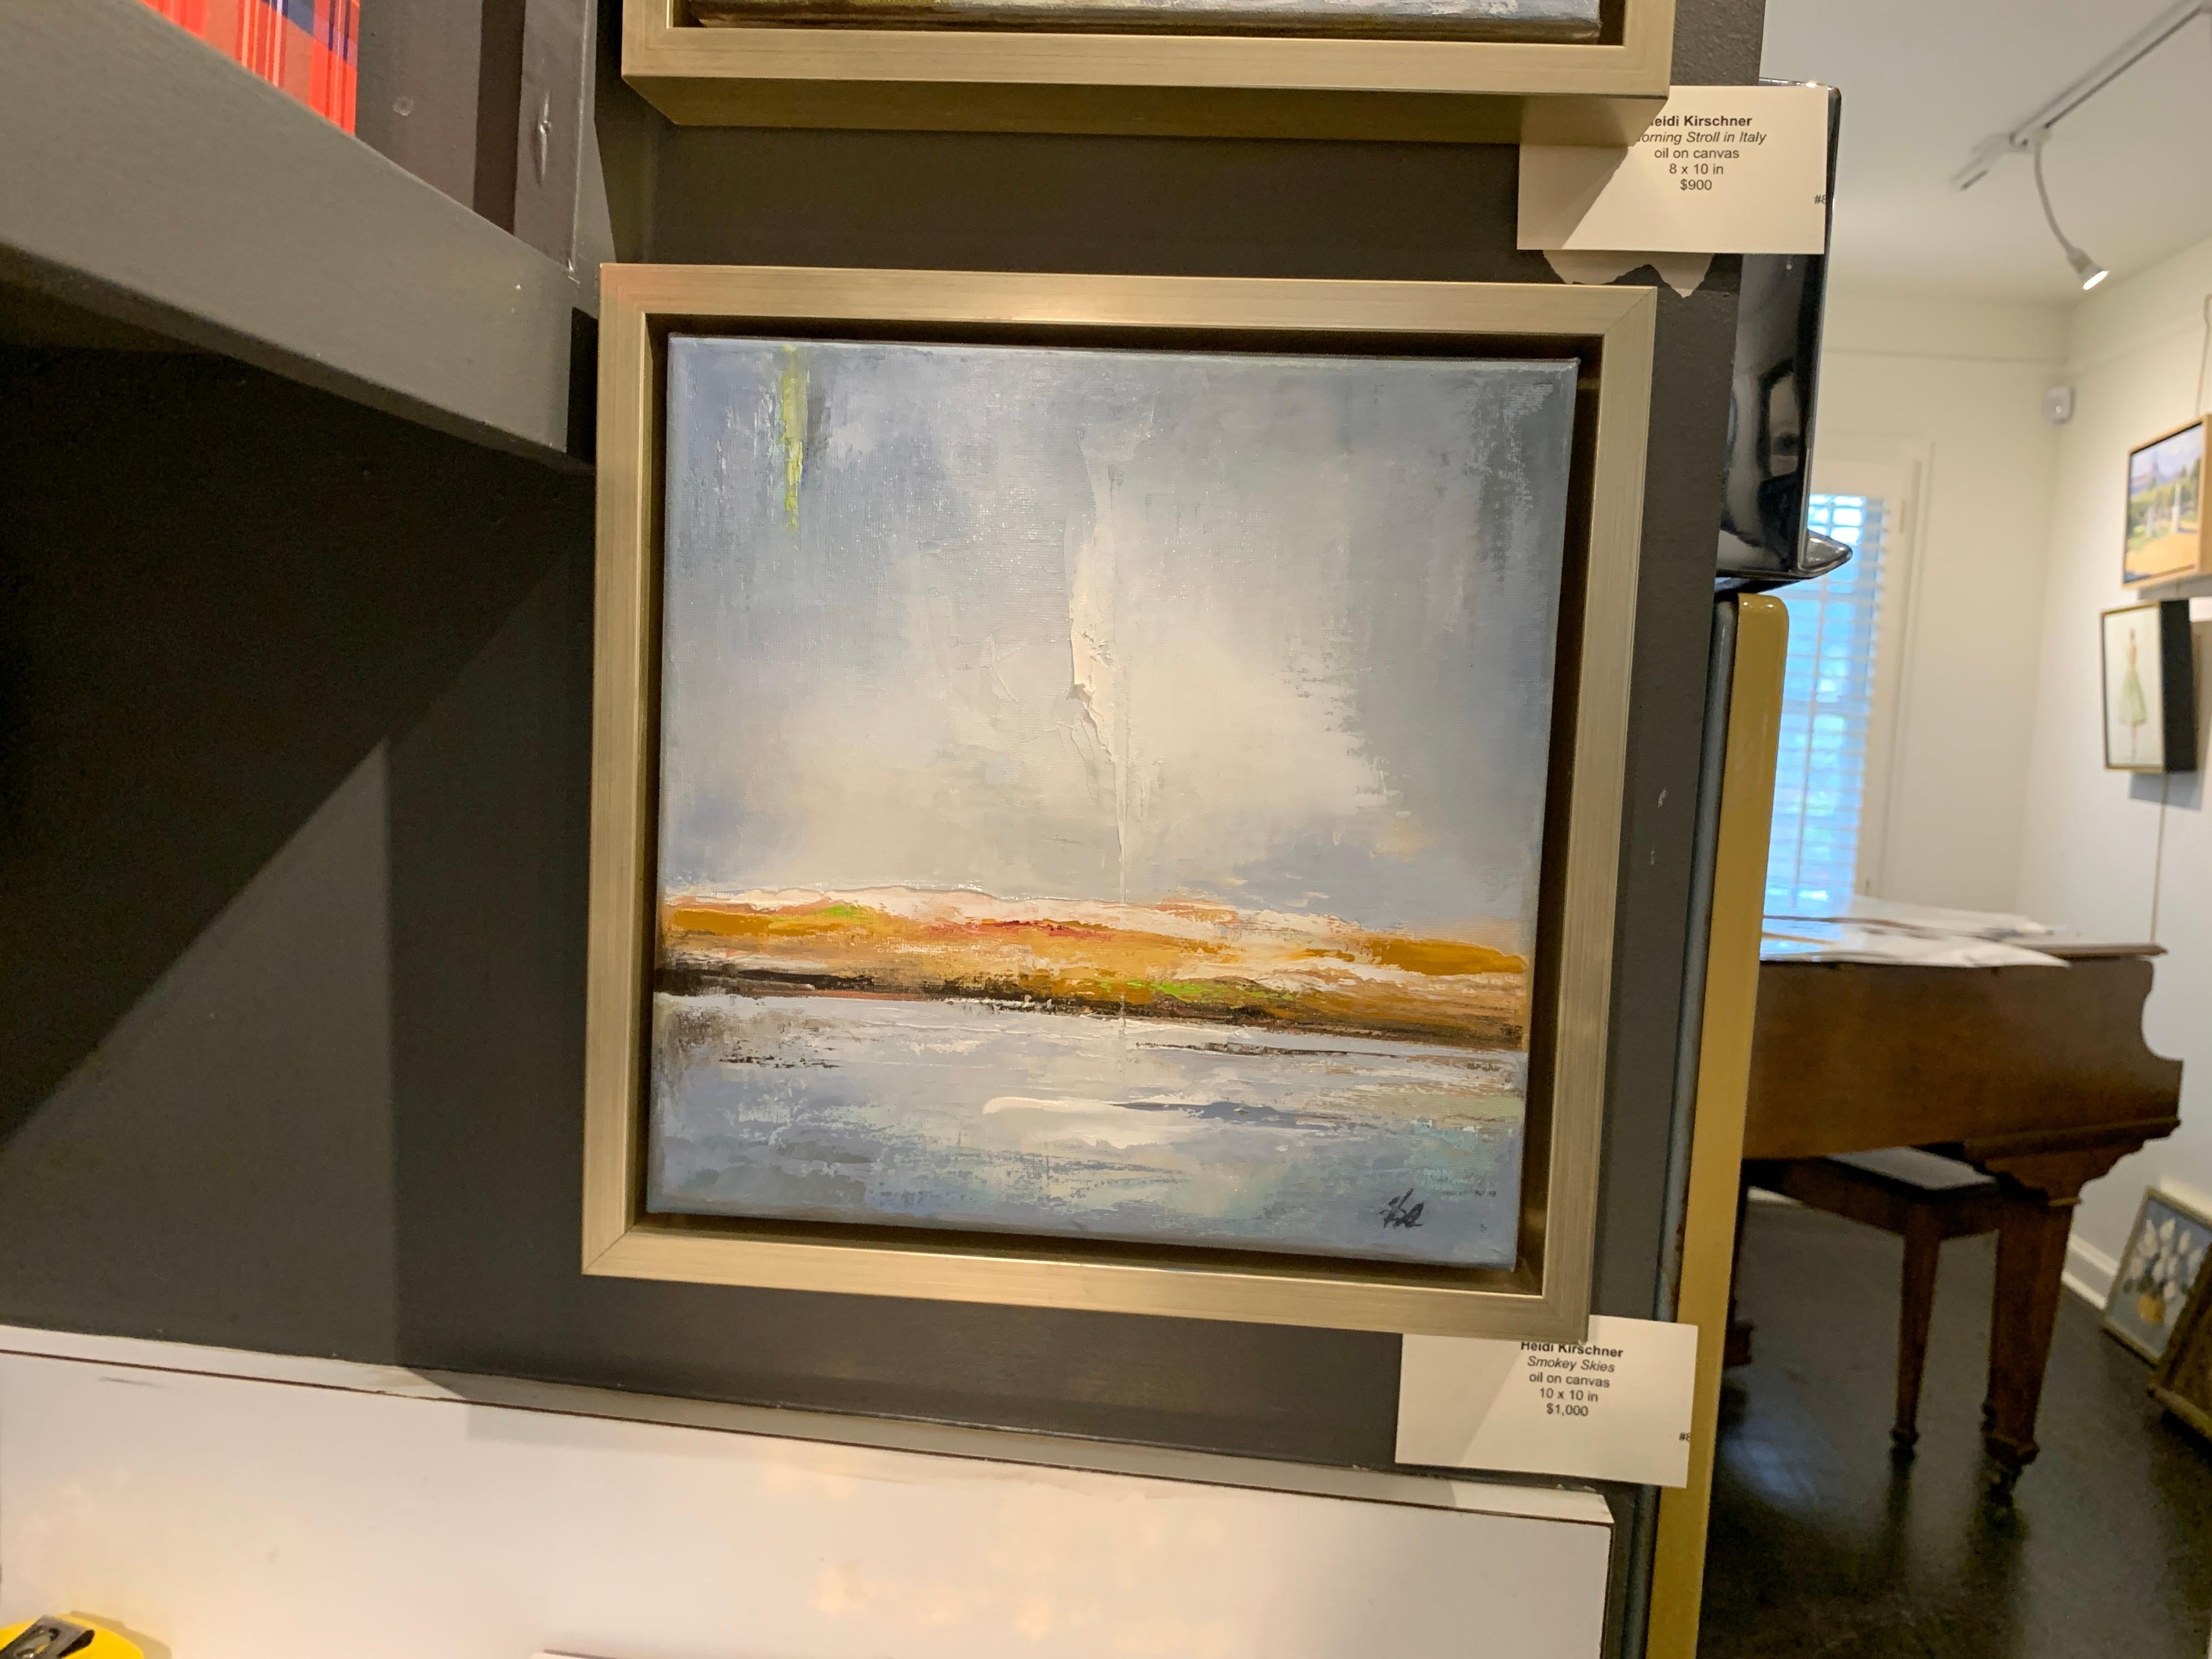 'Smokey Skies' is a framed oil on canvas landscape painting created by America artist Heidi Kirschner in 2020. Featuring a soft palette mostly made of a variation of pale blue, brown and green tones accented with subtle touches of white, the